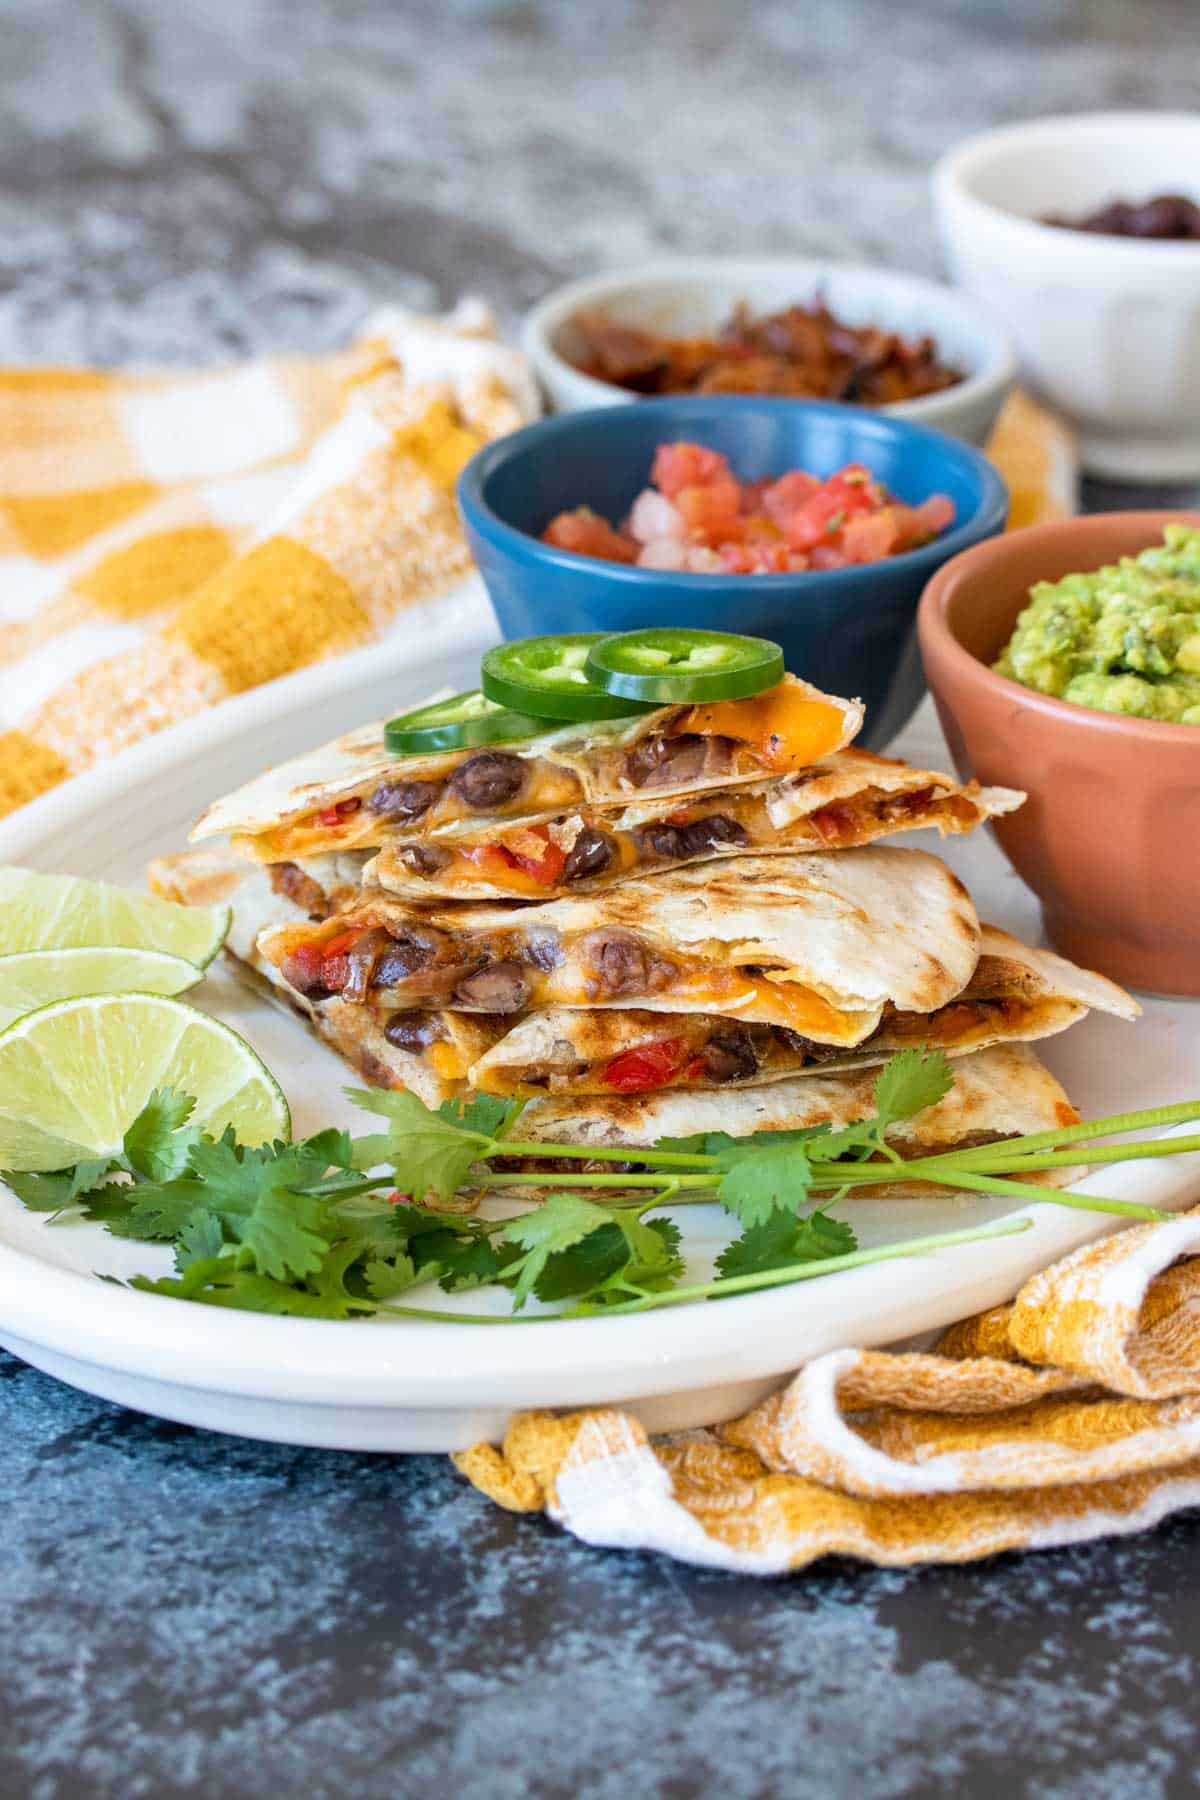 A white platter with colorful bowls of toppings and a stack of quesadillas with black beans and veggies inside